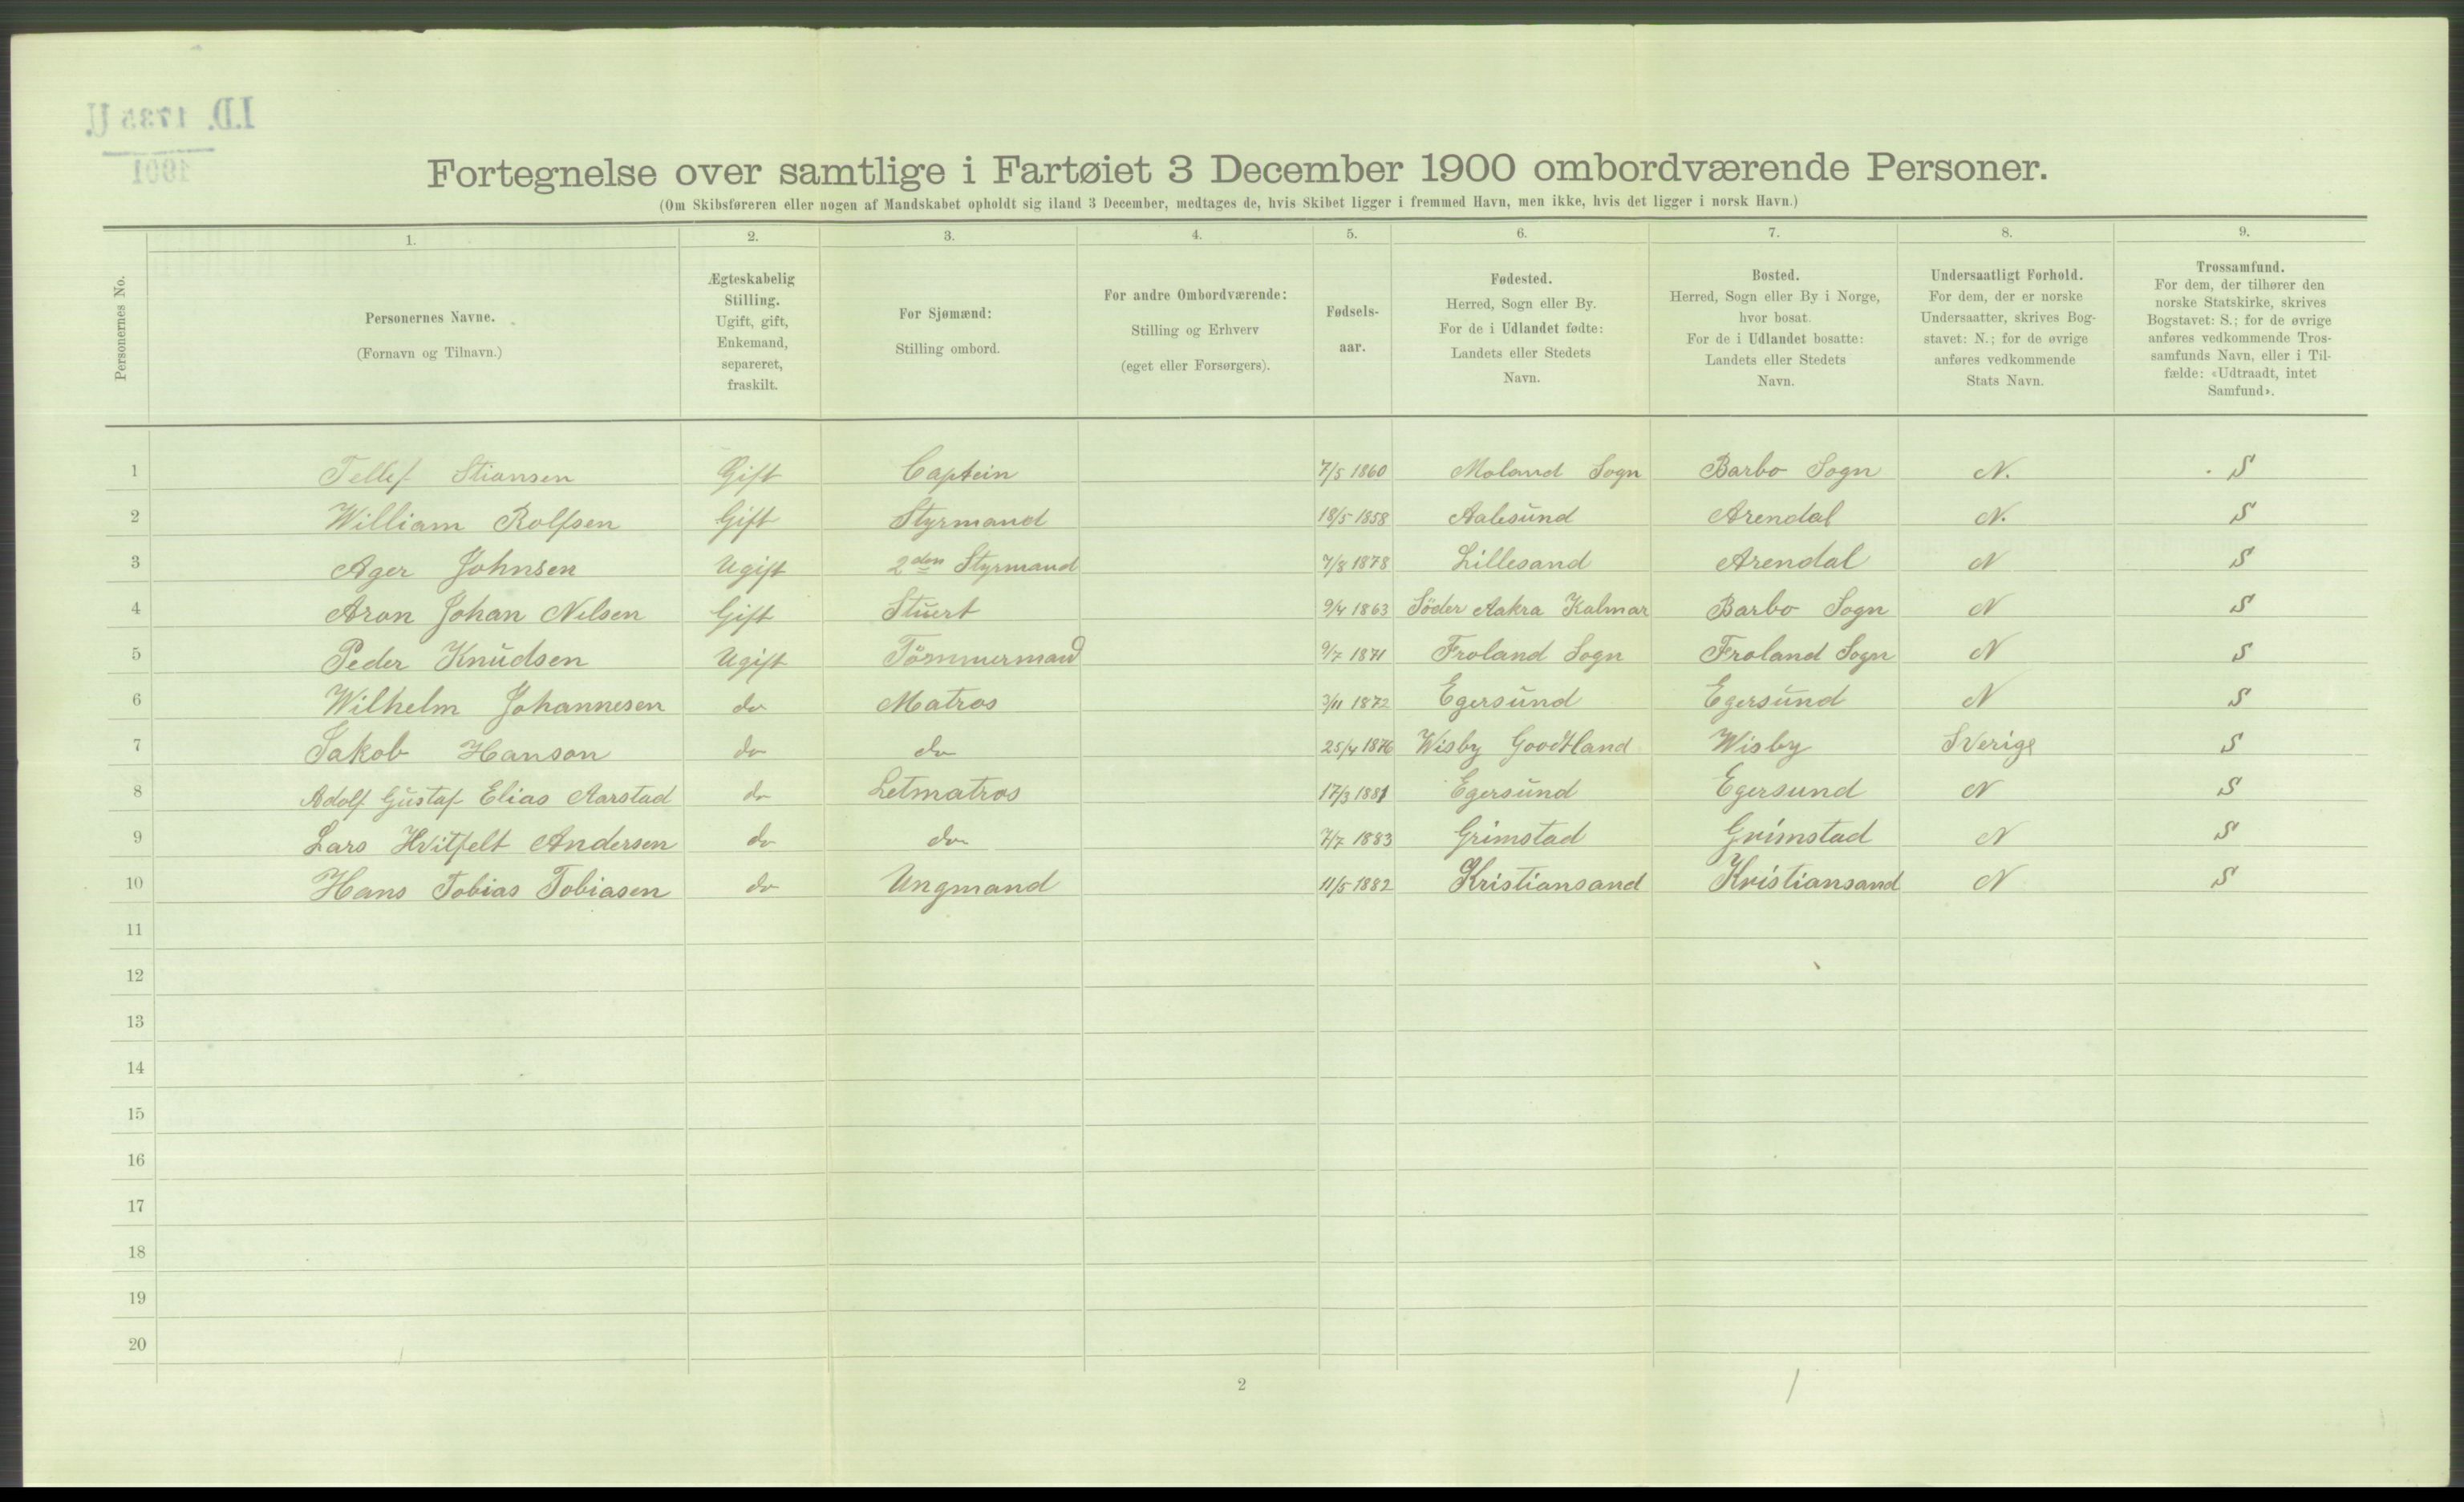 RA, 1900 Census - ship lists from ships in Norwegian harbours, harbours abroad and at sea, 1900, p. 5512